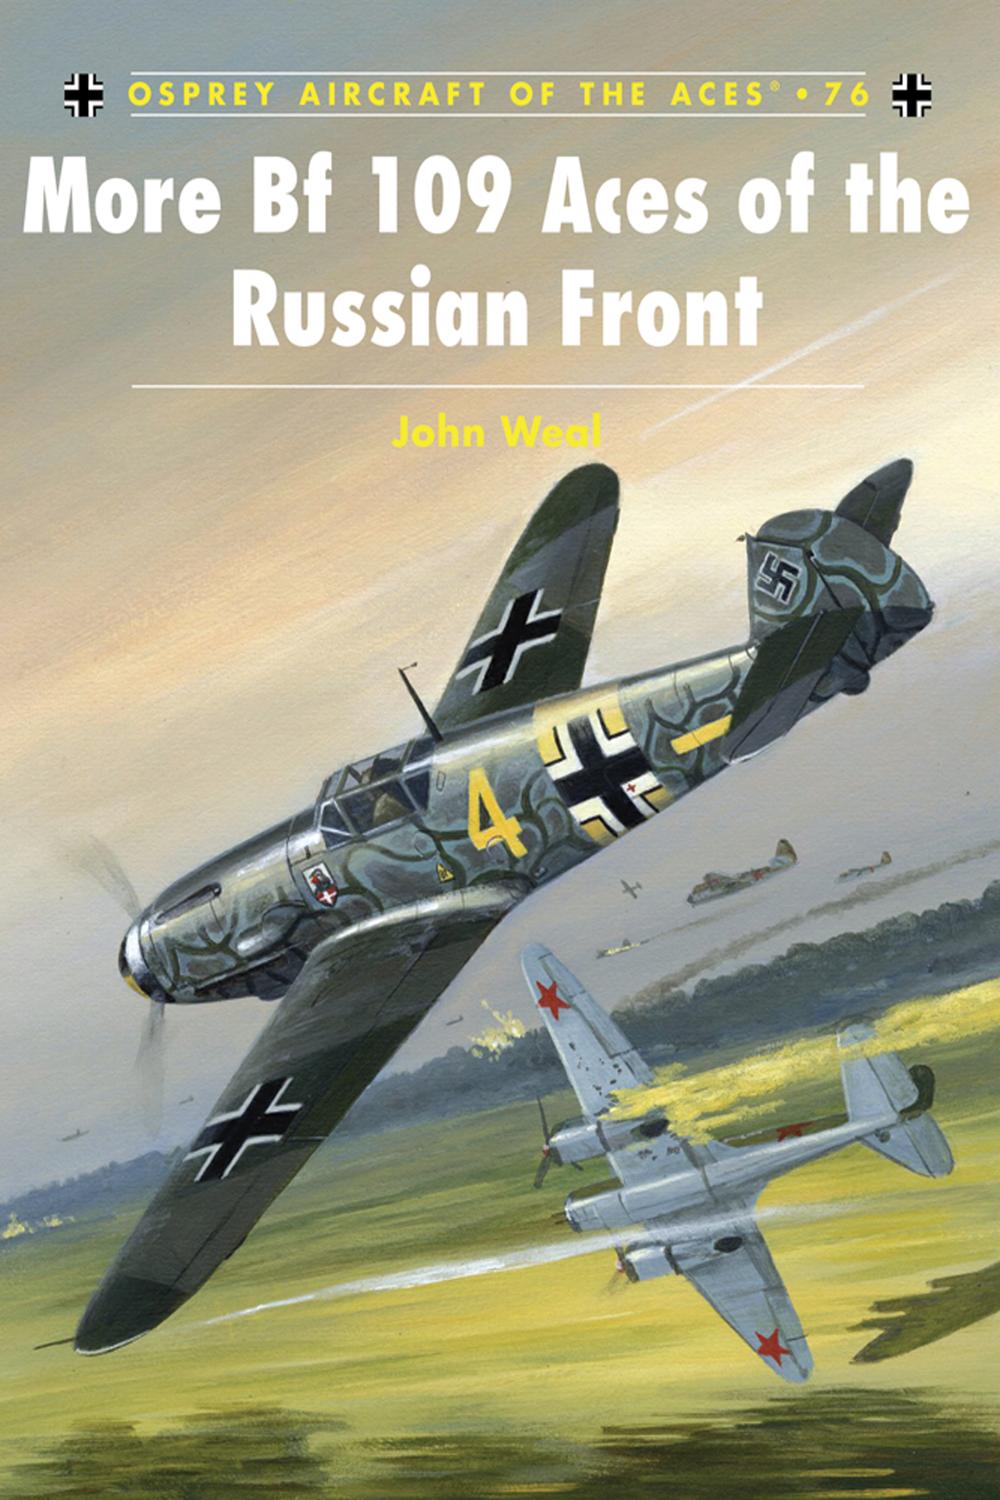 More Bf 109 Aces of the Russian Front - John Weal, John Weal